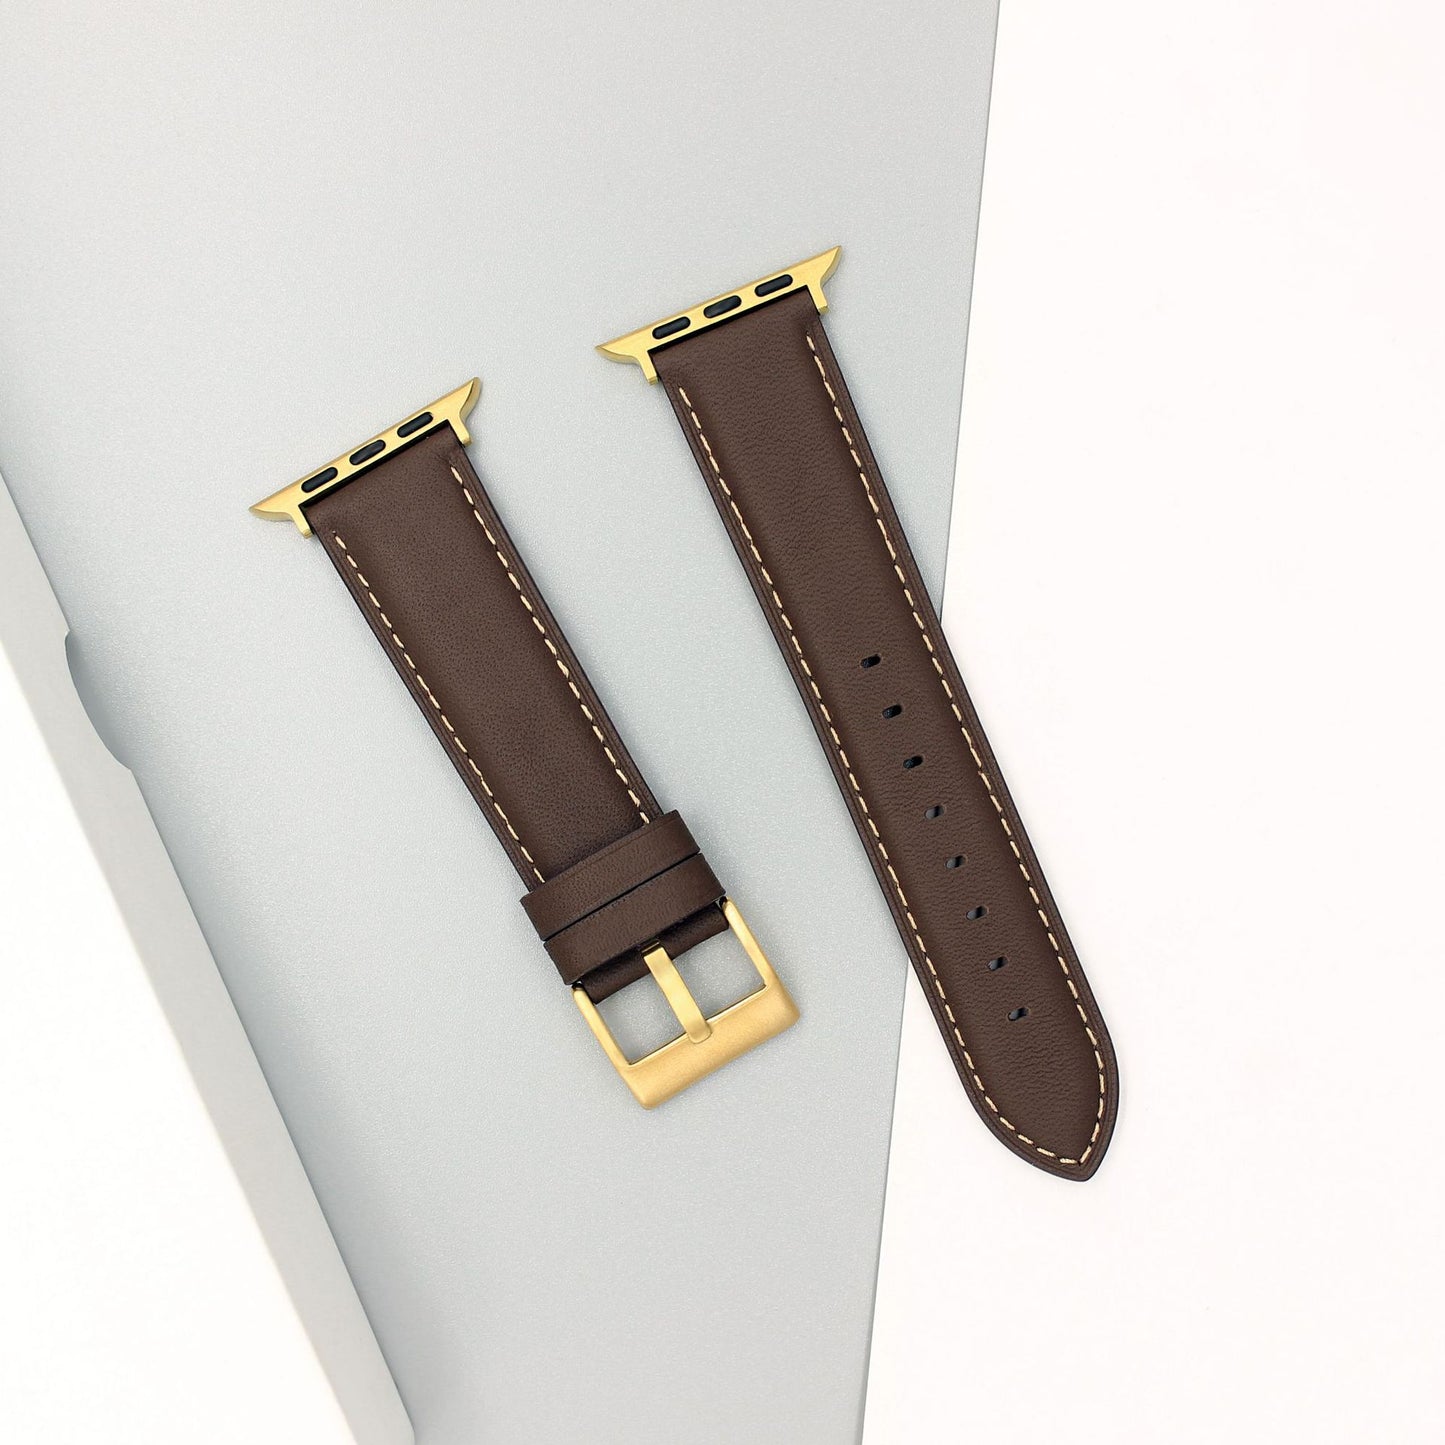 Best selling genuine leather cowhide Apple Watch strap for pets18